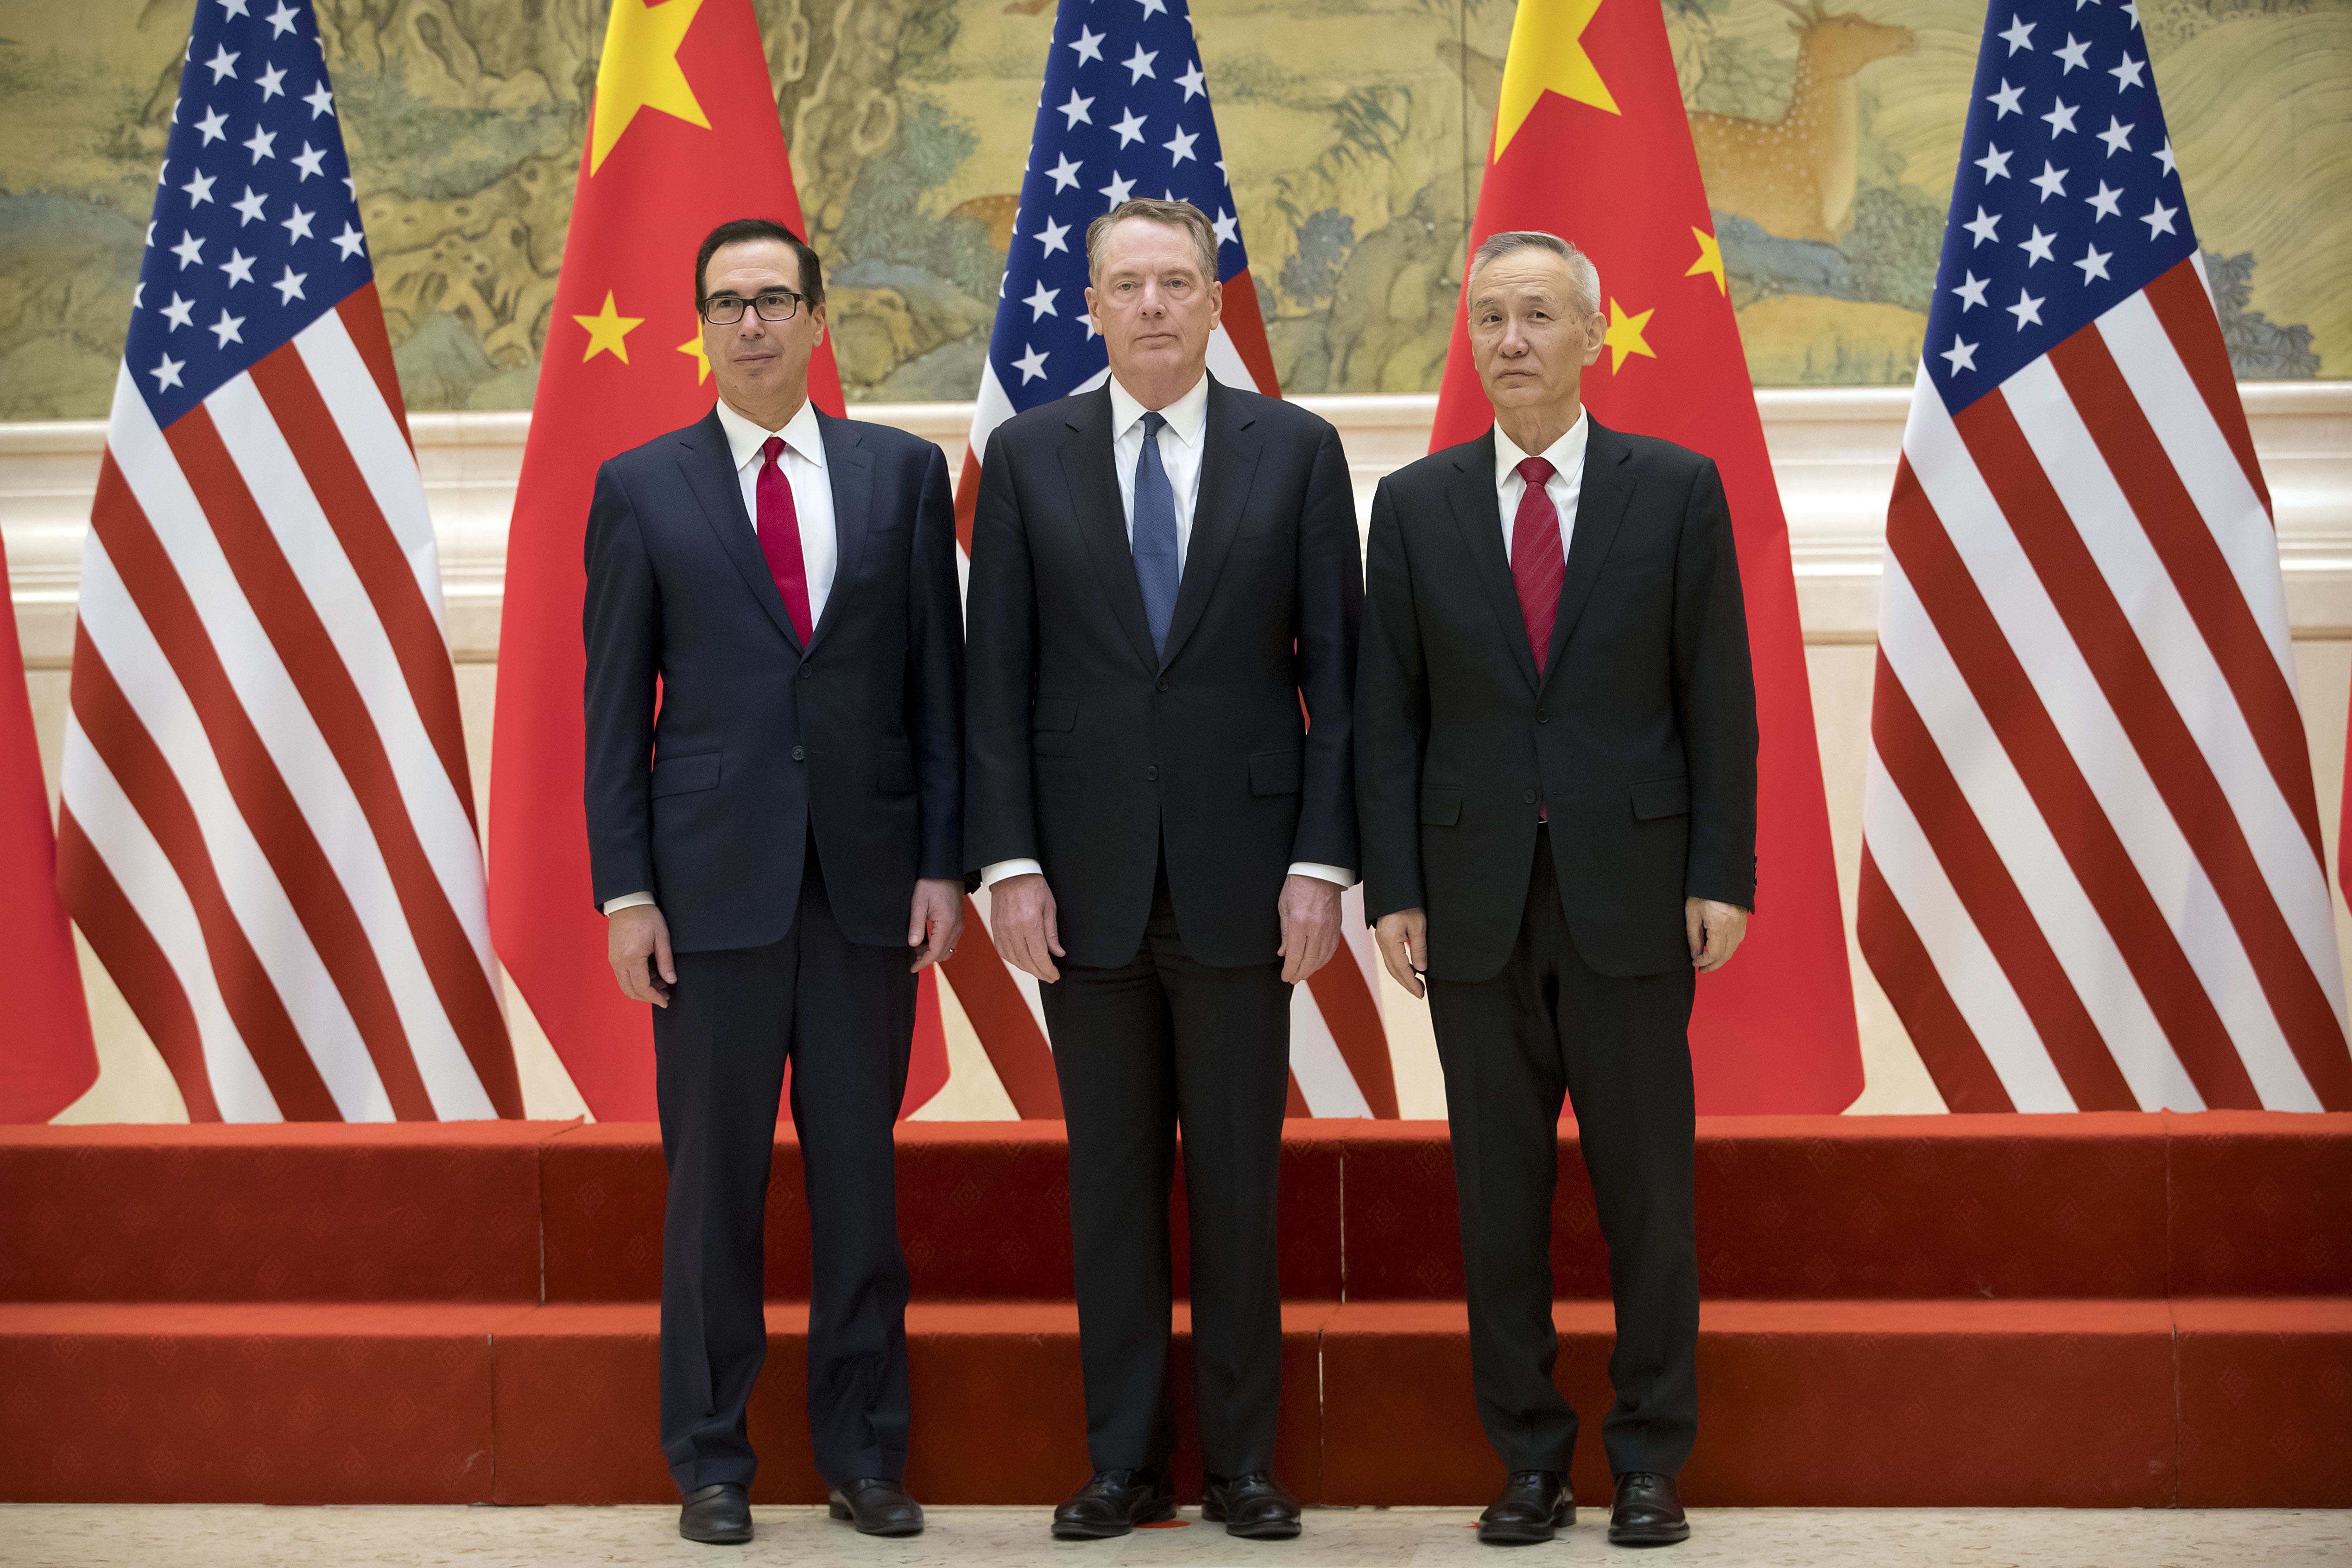 China invited US negotiators to Beijing for another round of trade talks, report says